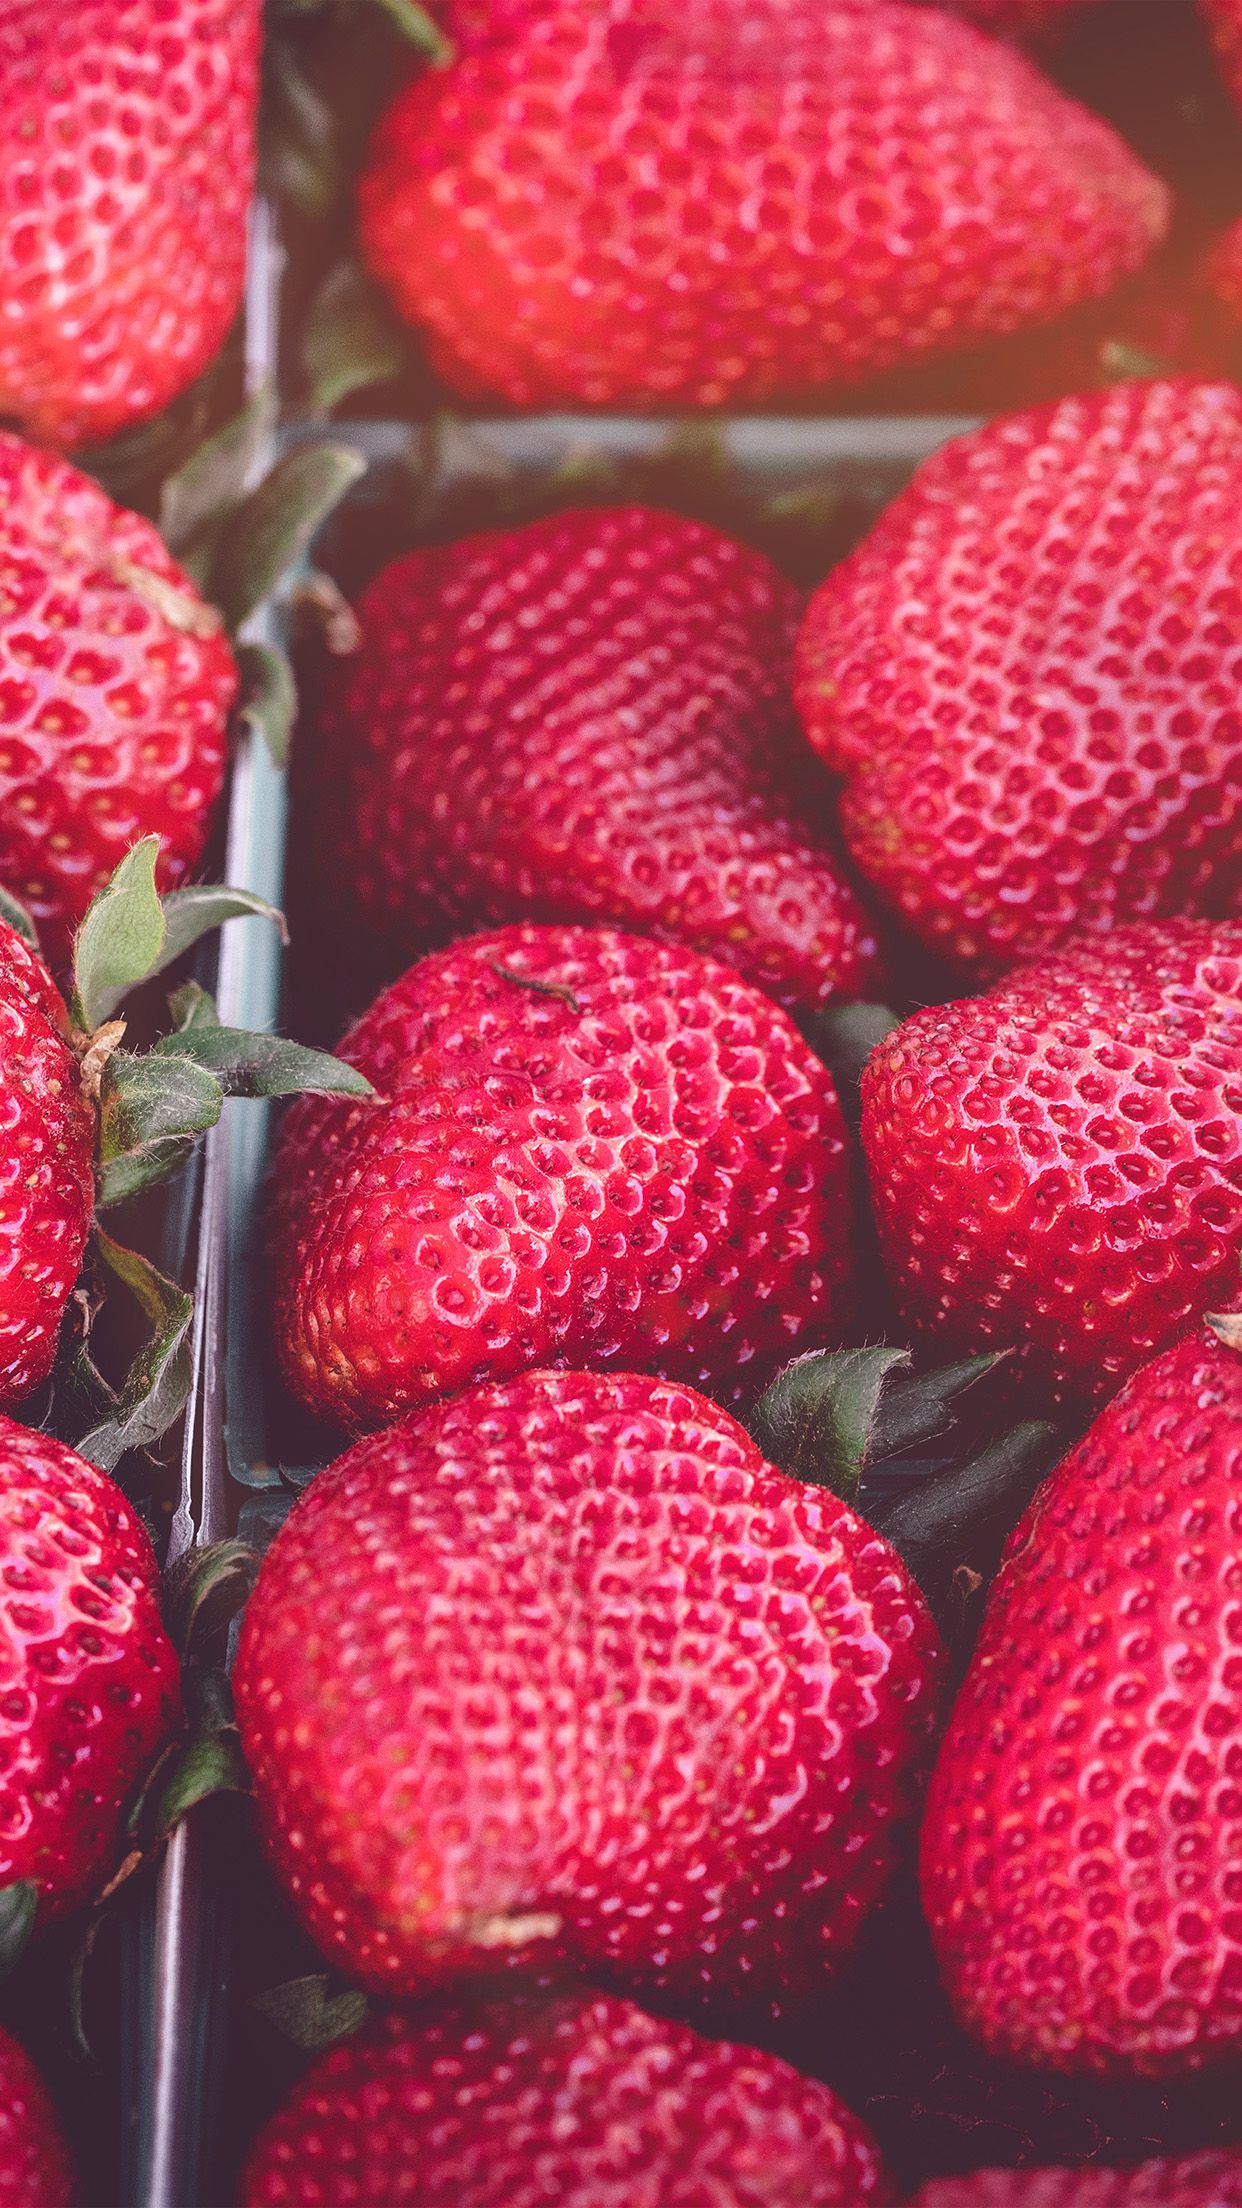 A close up of strawberries in a basket - Strawberry, fruit